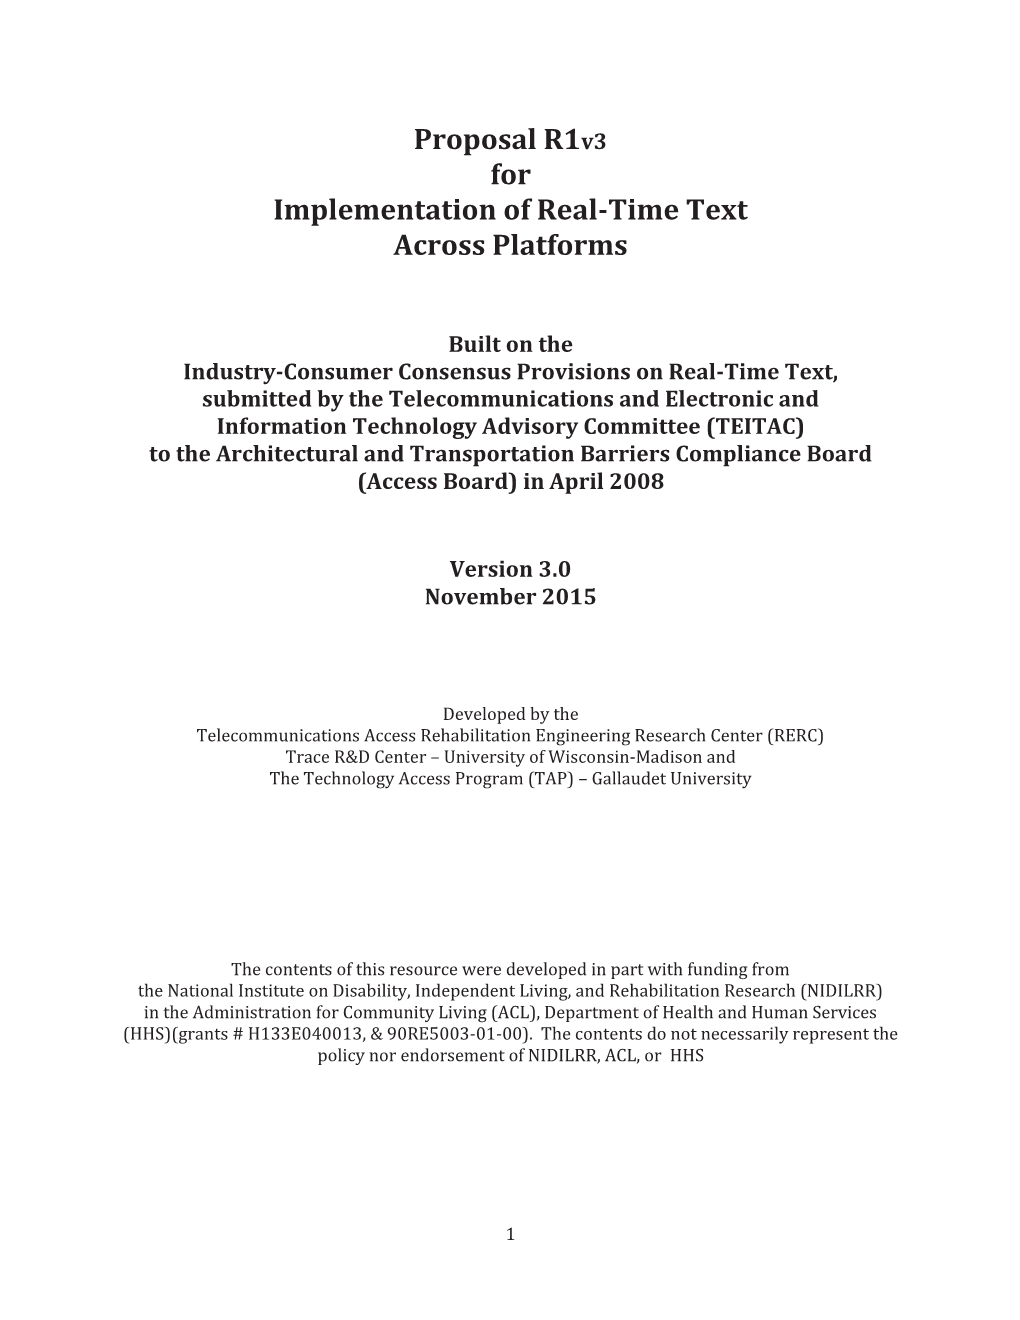 Proposal R1v3 for Implementation of Real-Time Text Across Platforms